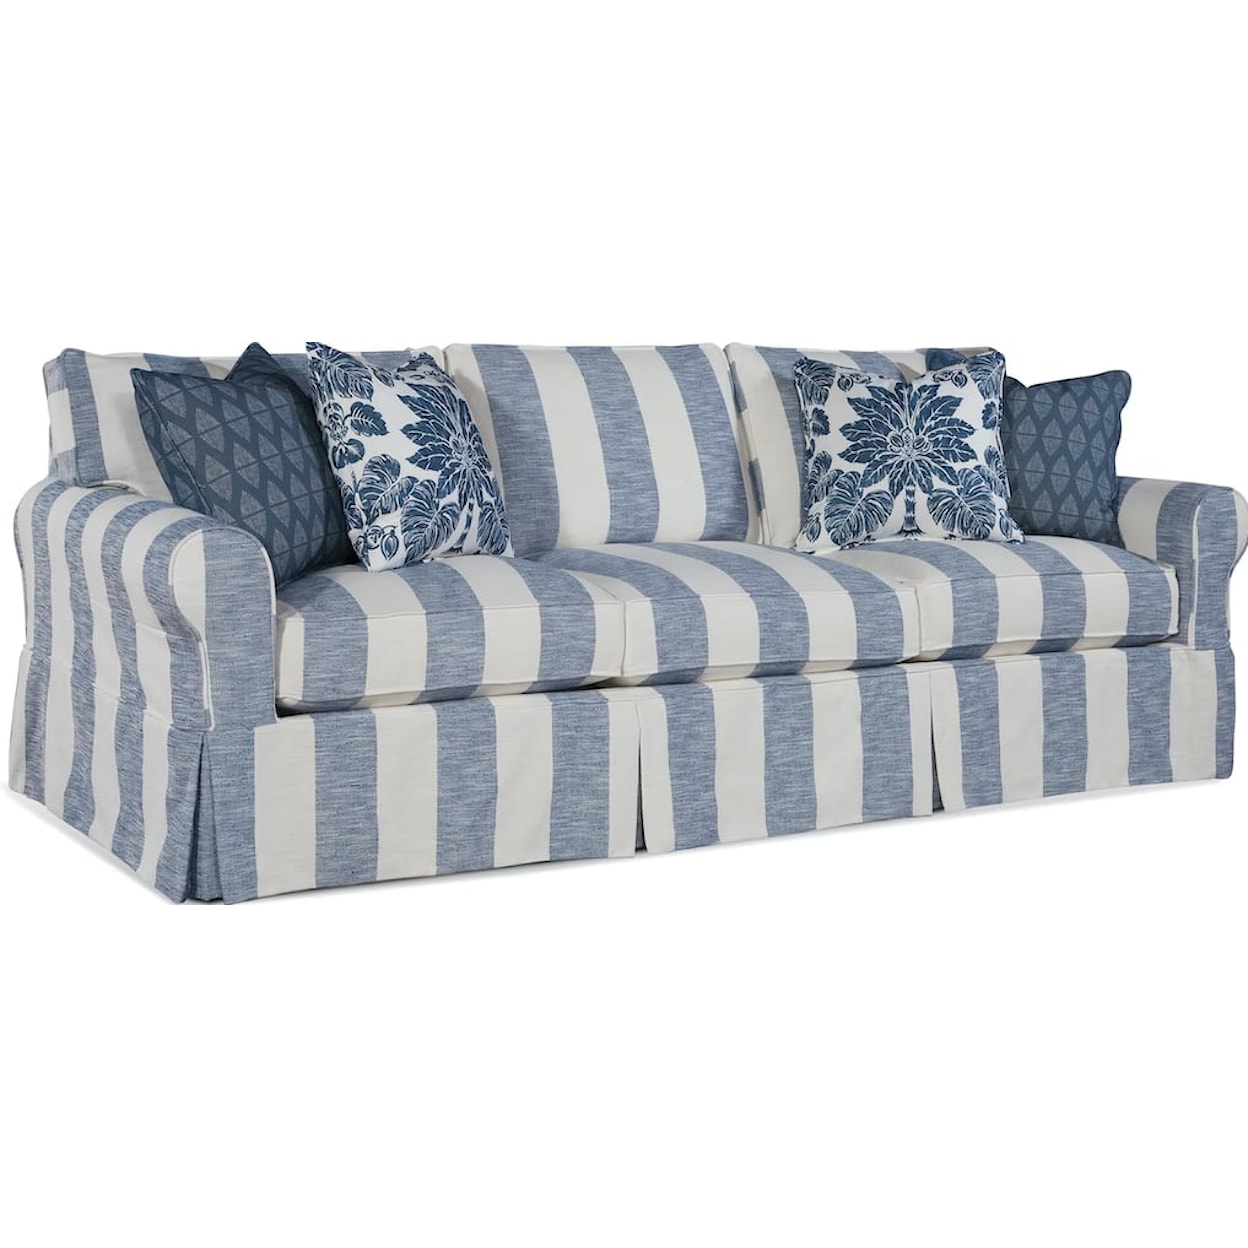 Braxton Culler Bedford Estate Sofa with Slipcover